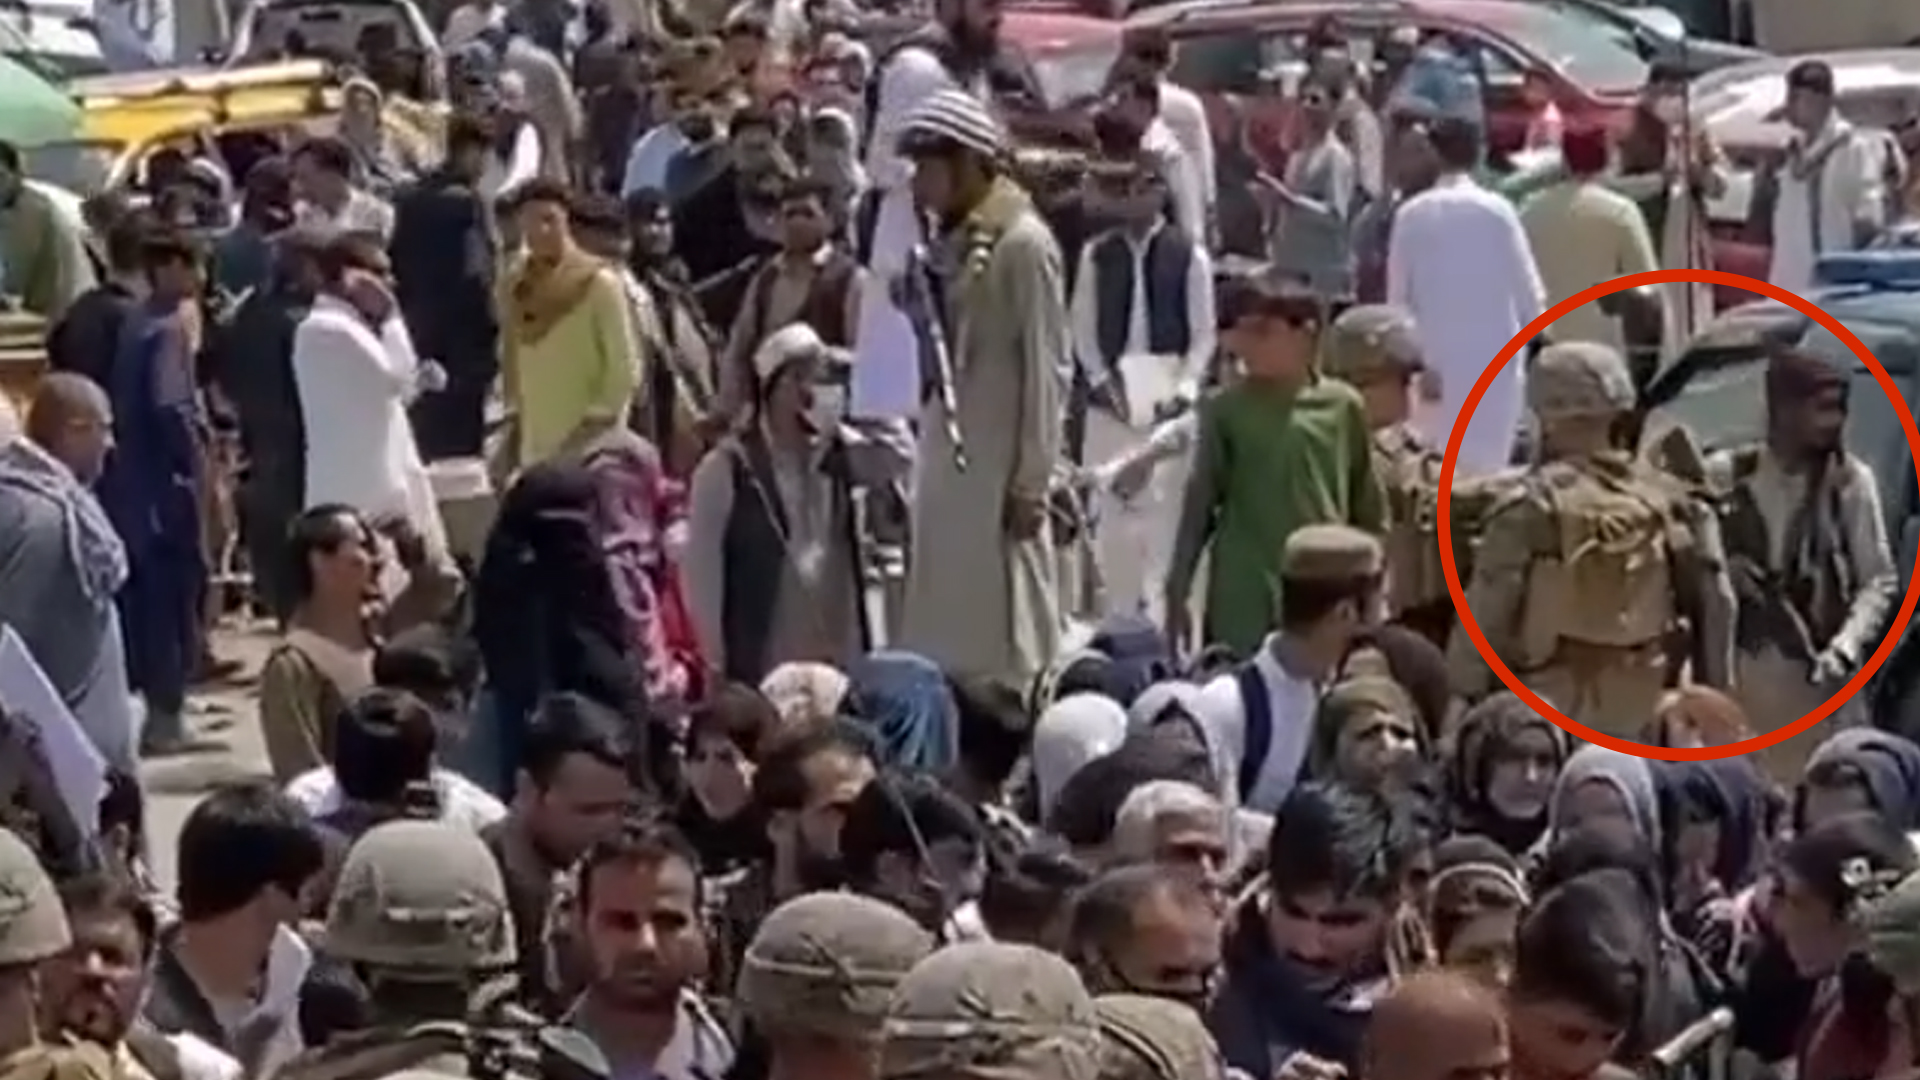 US Marines and Taliban outside Kabul airport are so close they can touch each other